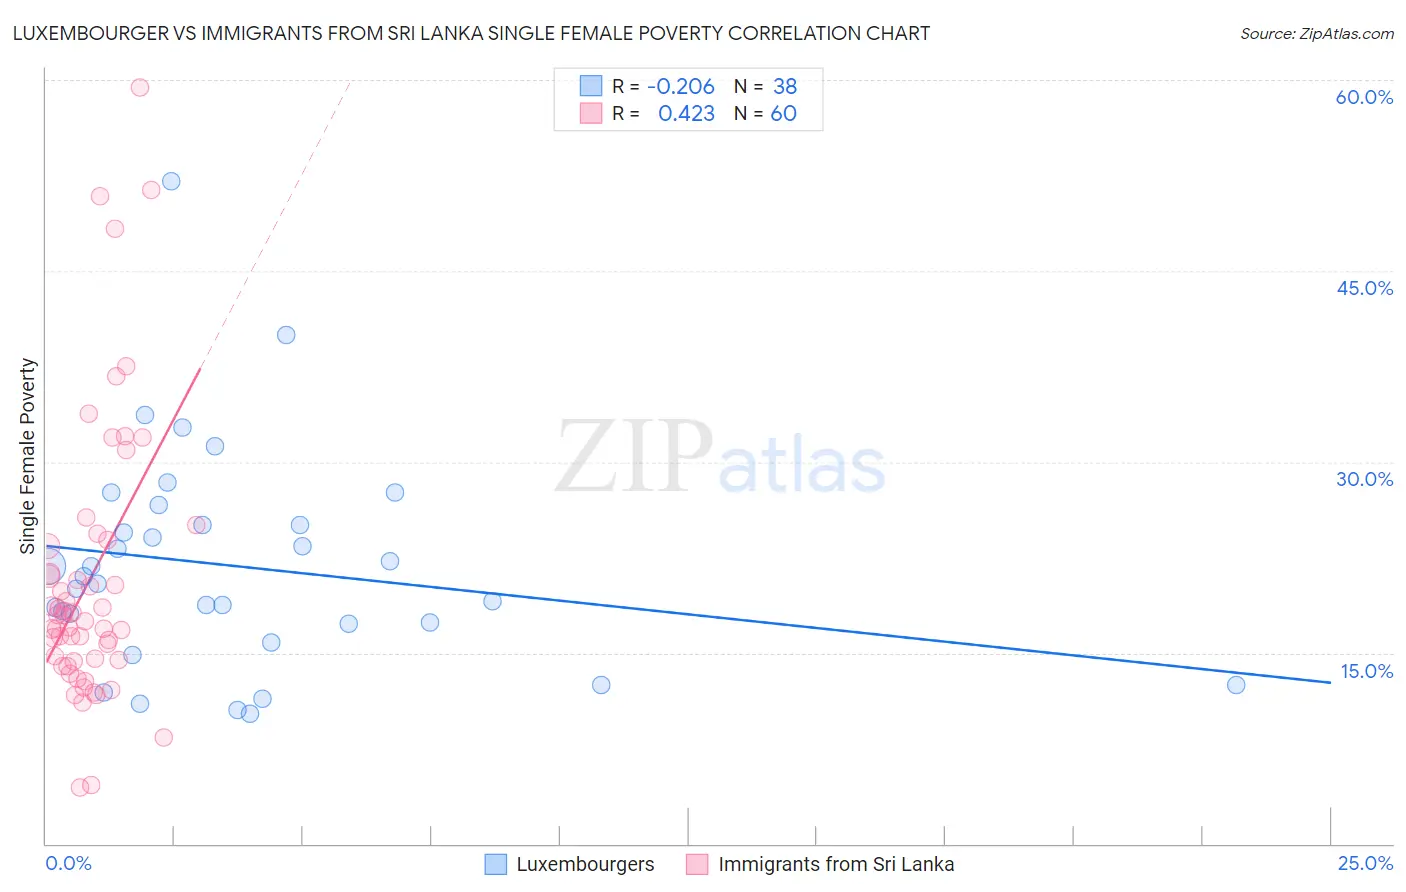 Luxembourger vs Immigrants from Sri Lanka Single Female Poverty